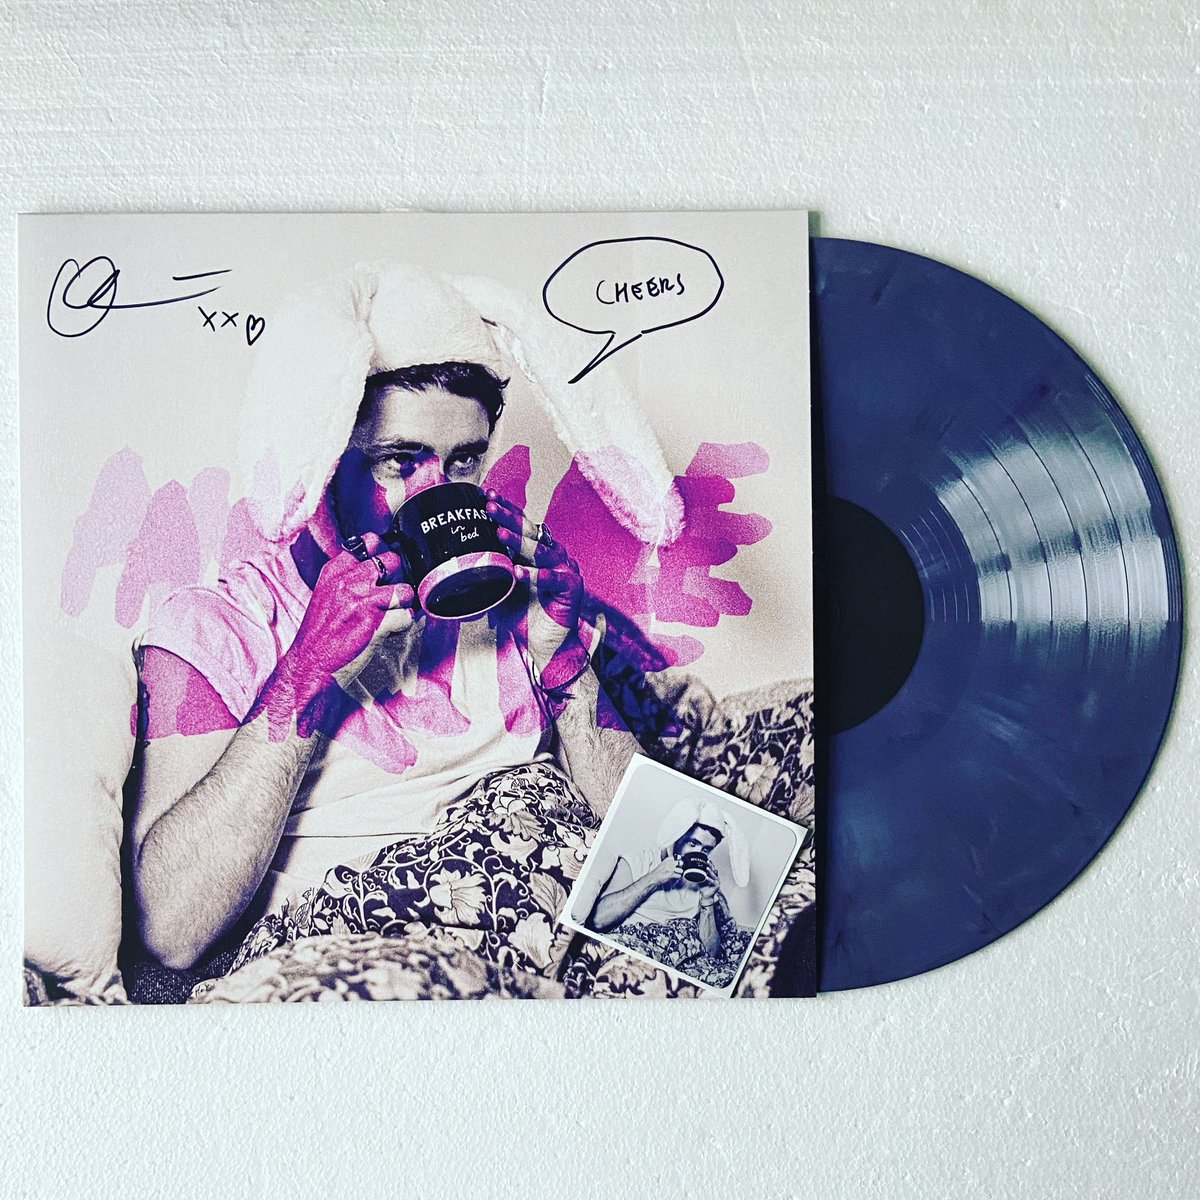 New Arrival: Debut album by Anamoe Drive “Breakfast In Bed” Hand Signed & pressed on EcoMix Colour Vinyl